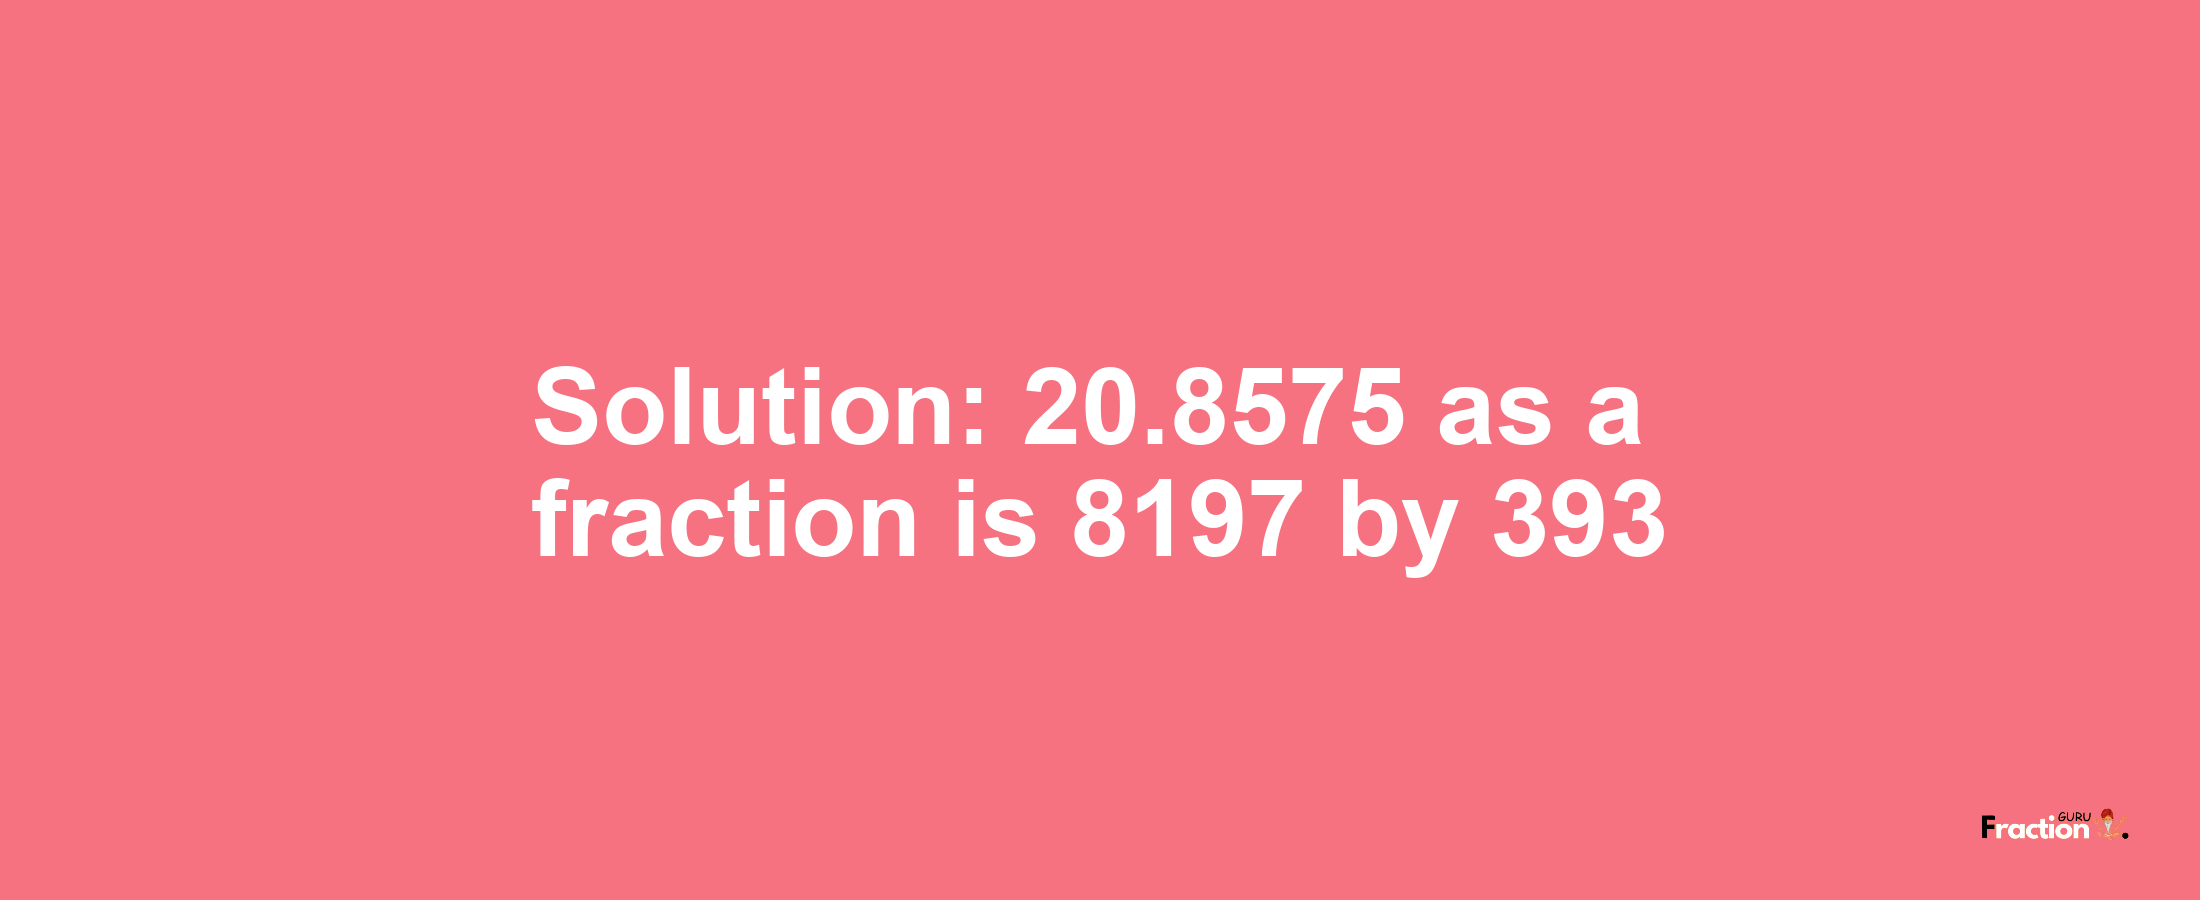 Solution:20.8575 as a fraction is 8197/393